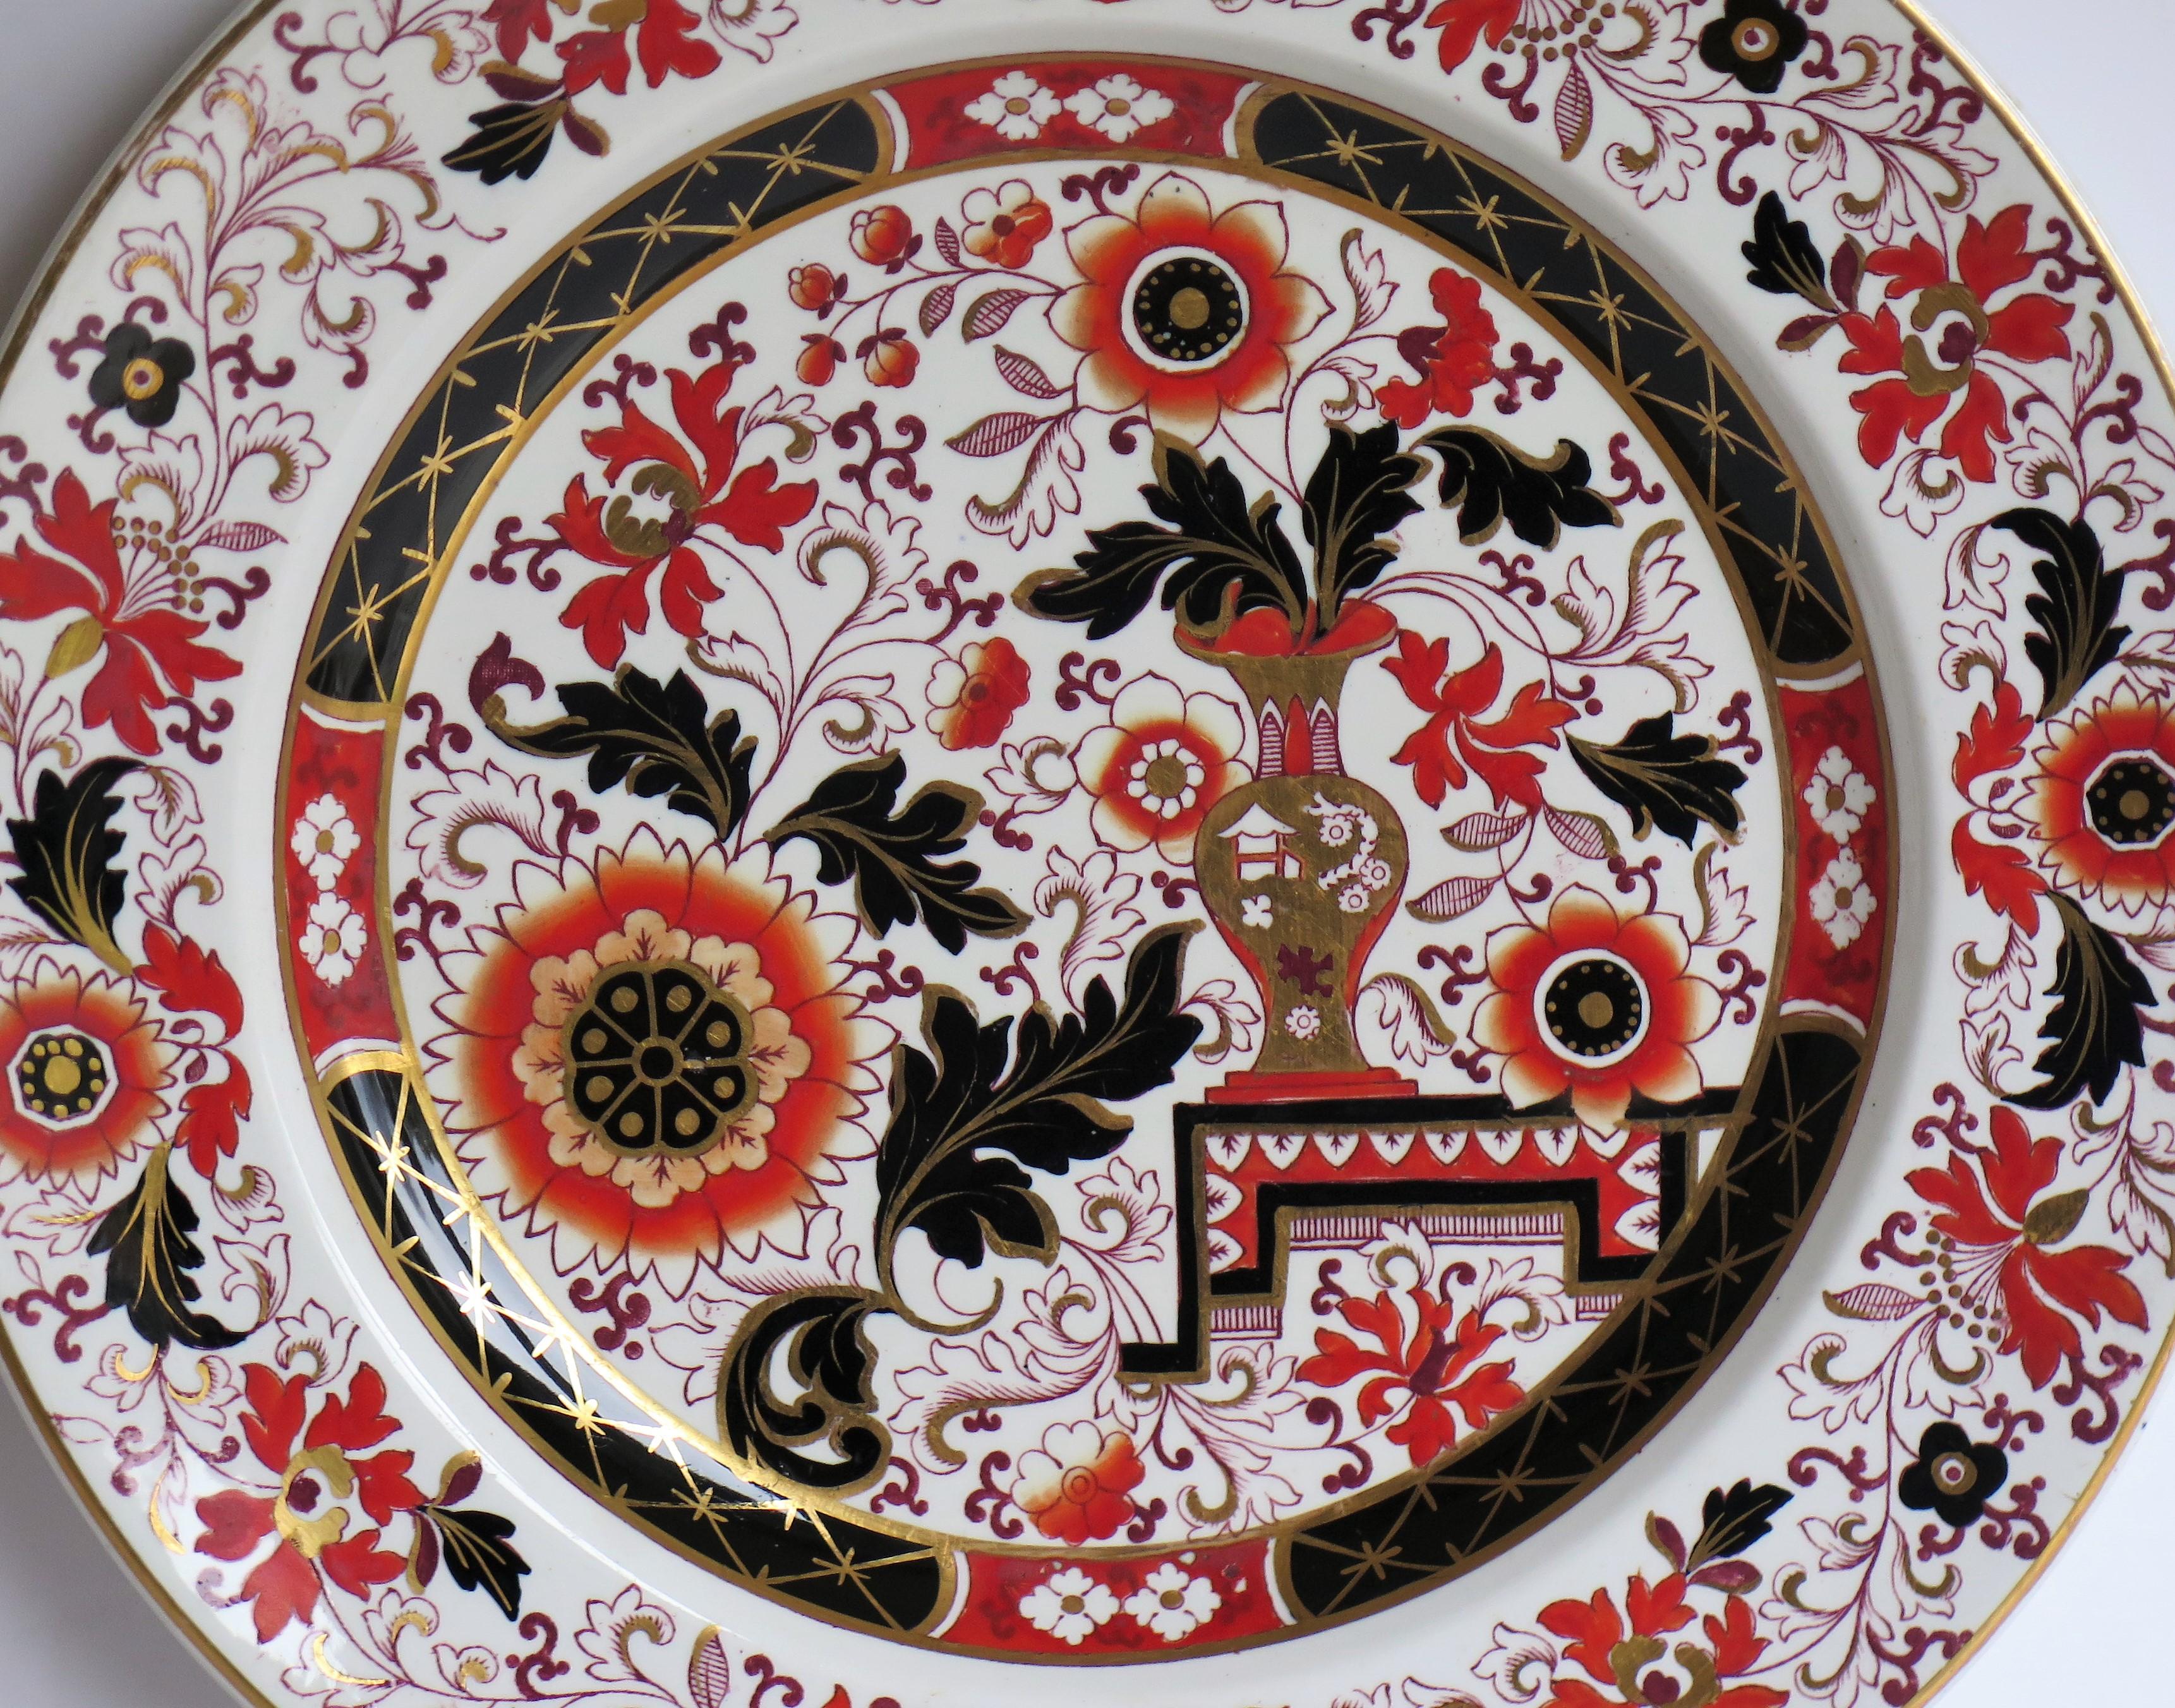 Hand-Painted Masons Ashworths Ironstone Dinner Plate in Old Japan Vase Pattern, circa 1870